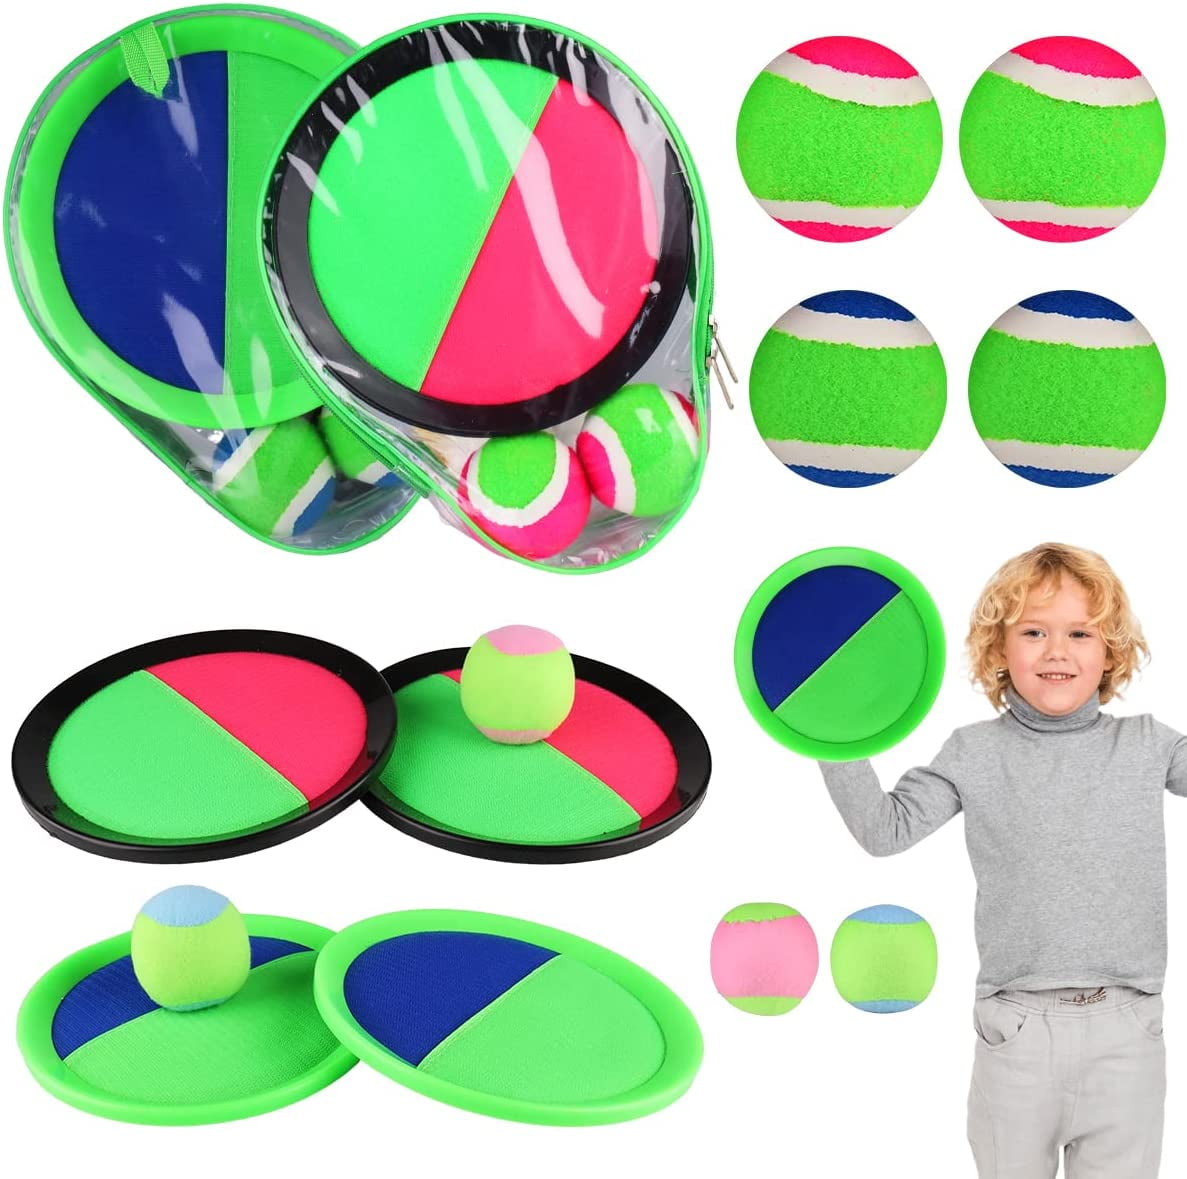 Toss and Catch Ball Game Set Paddle Game Ball Kits Beach Toys Velcro Ball  Waterproof Outdoor Garden Games Sports Includes 4 Hand Pads,6 Balls and 2  Storage Bag 